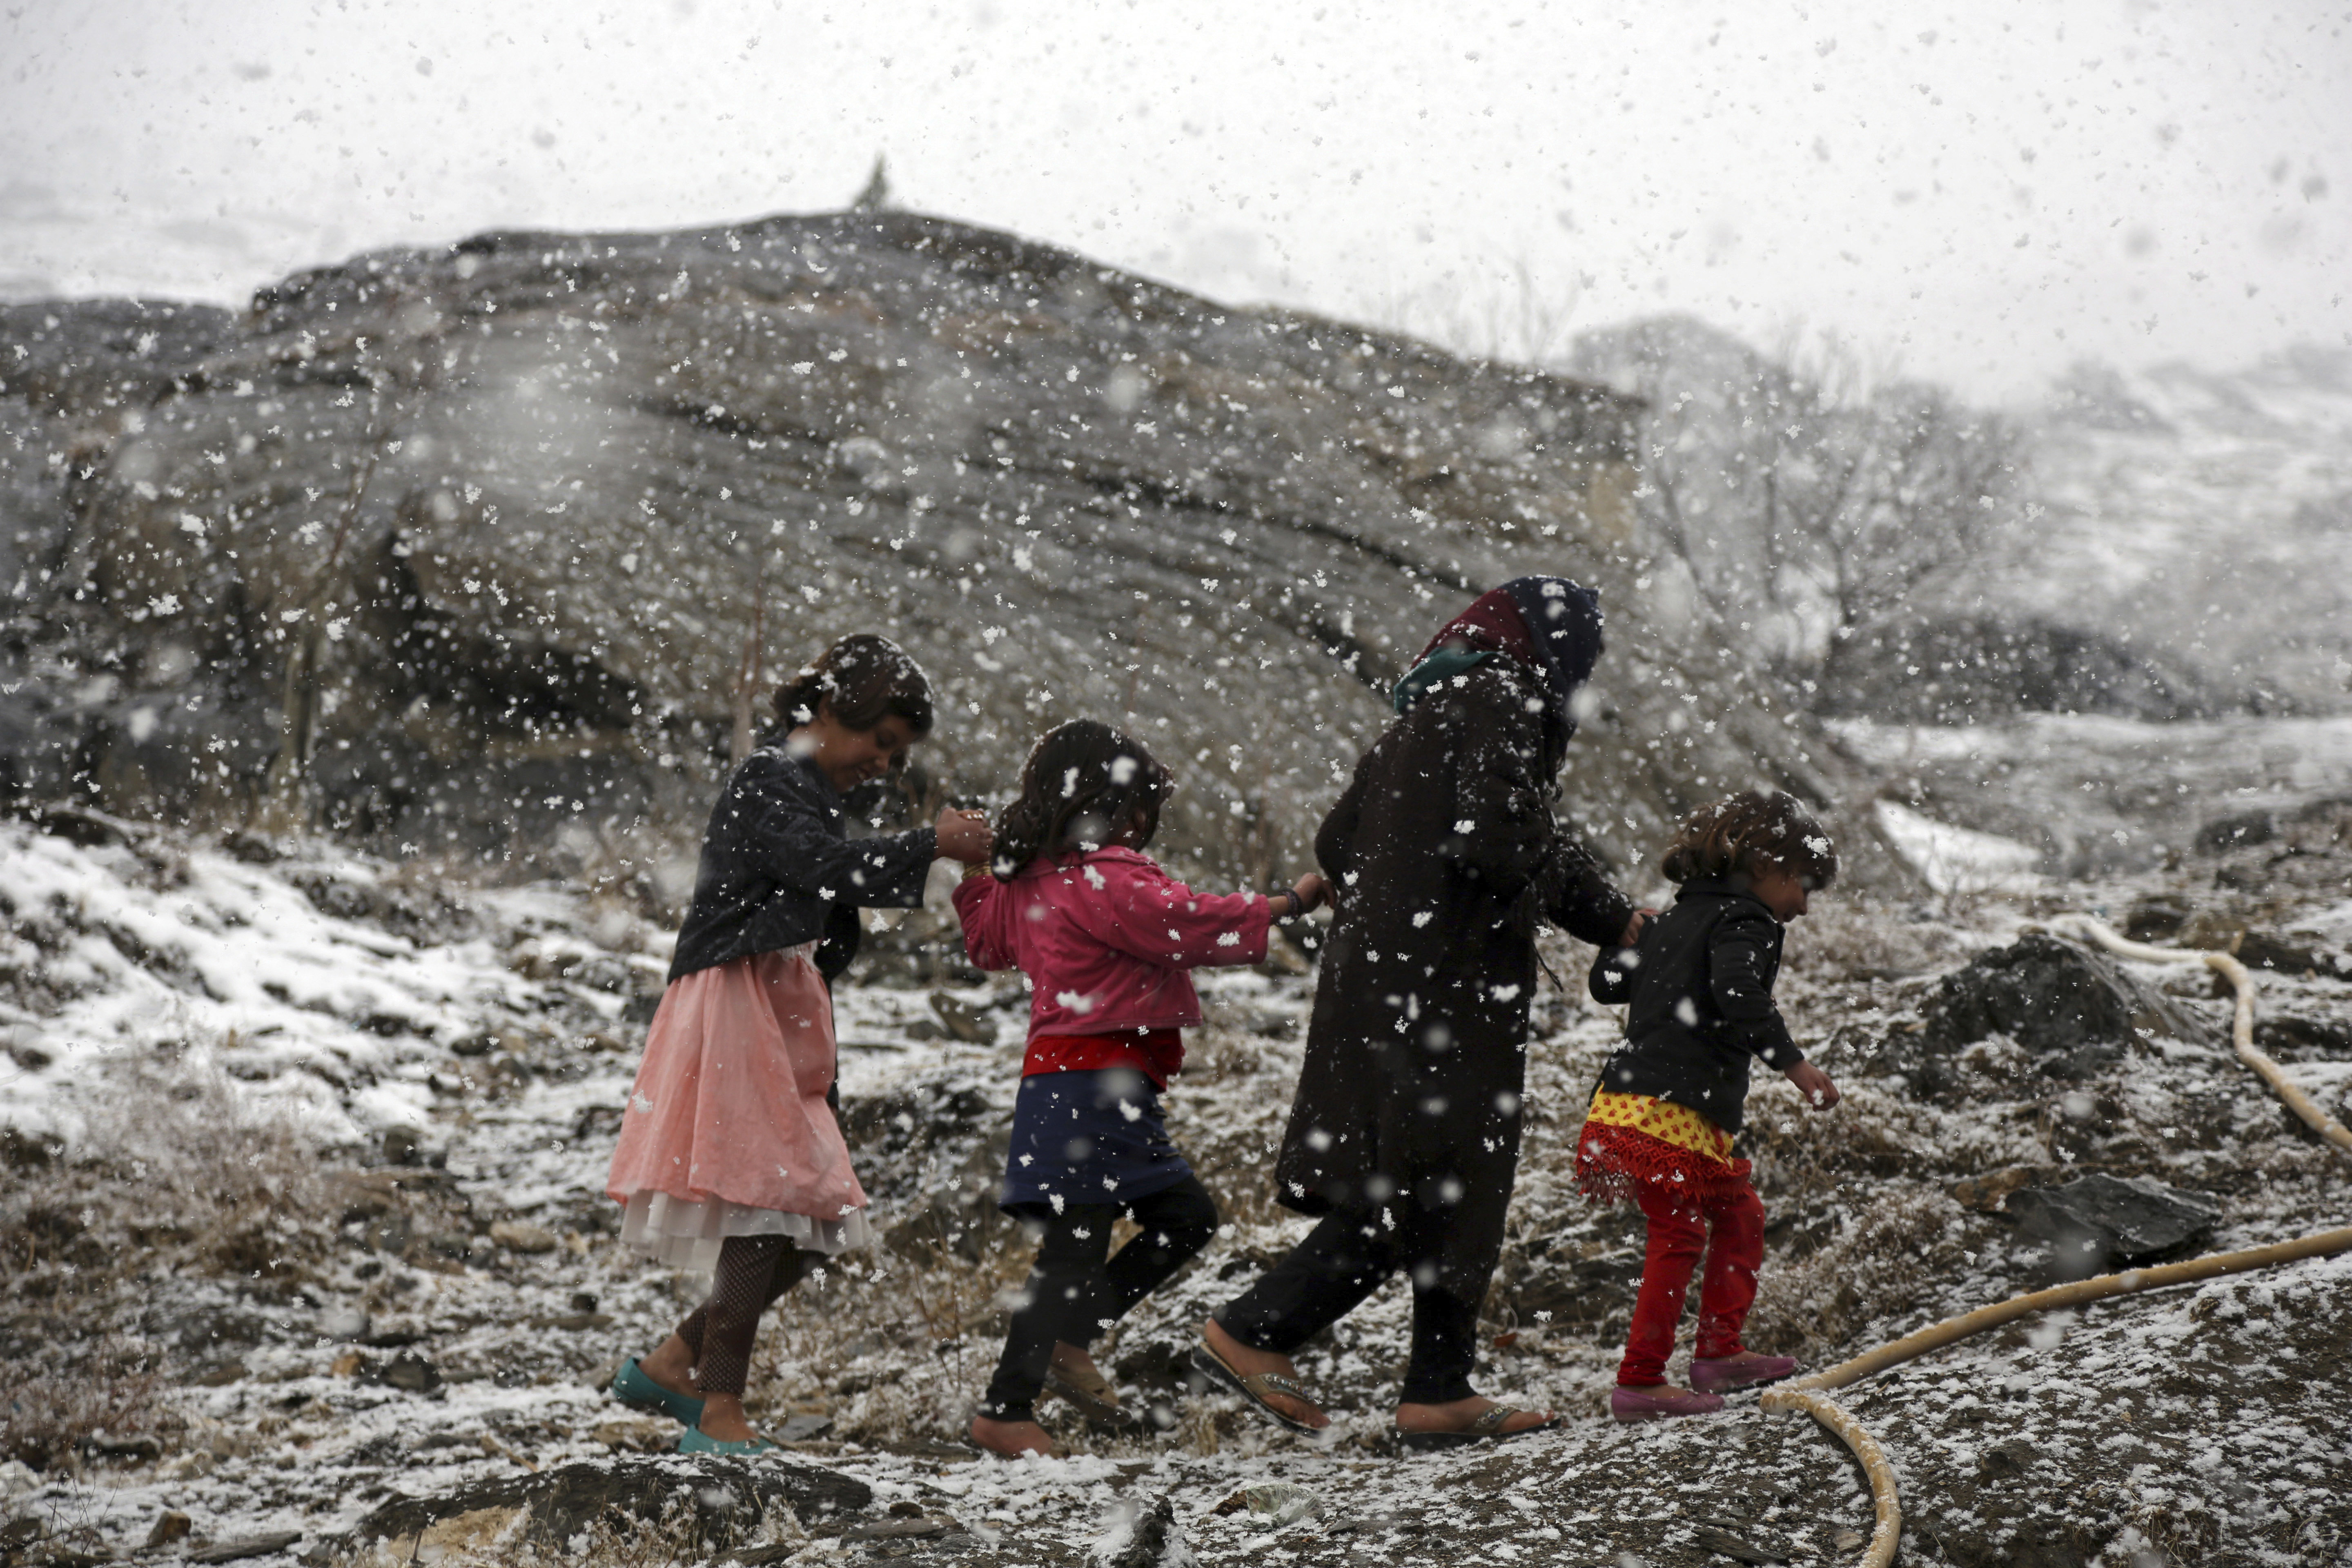 Afghan children walk during a snowfall on hill on the outskirts of Kabul, Afghanistan, Wednesday, Jan. 31, 2018. (AP Photo/Rahmat Gul)